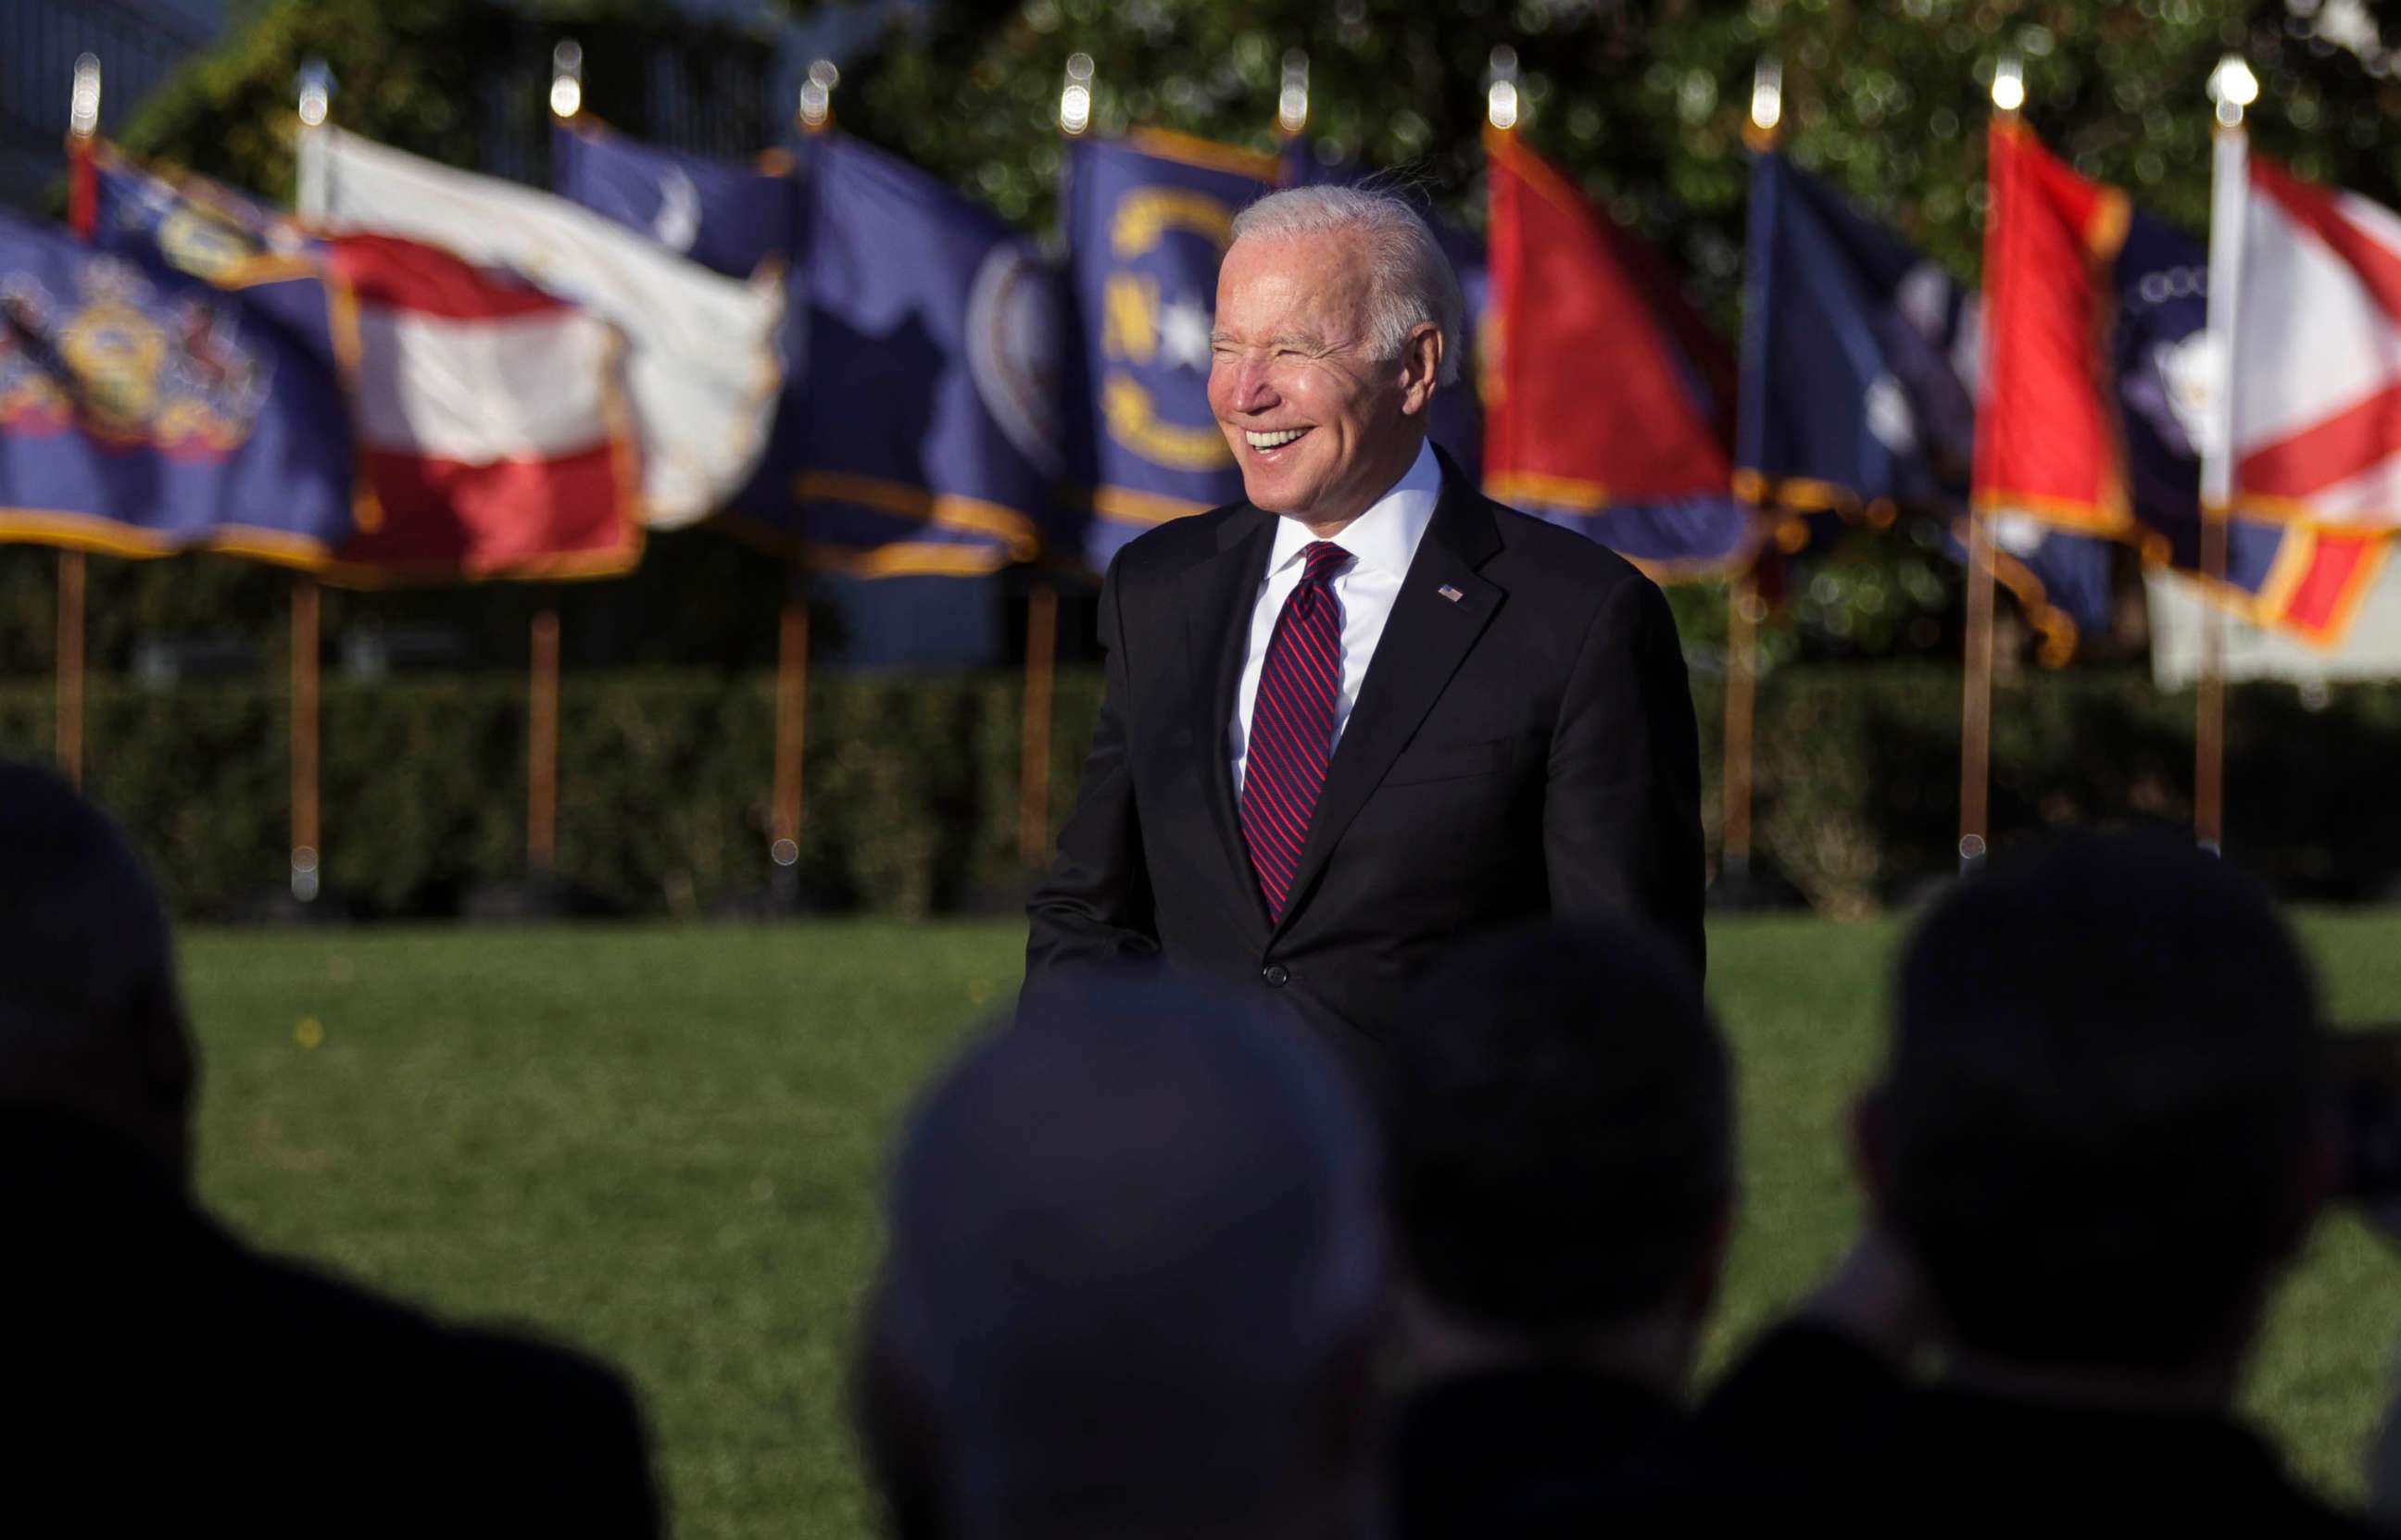 PHOTO: President Joe Biden arrives for the signing ceremony for the Infrastructure Investment and Jobs Act on the South Lawn at the White House on Nov. 15, 2021.